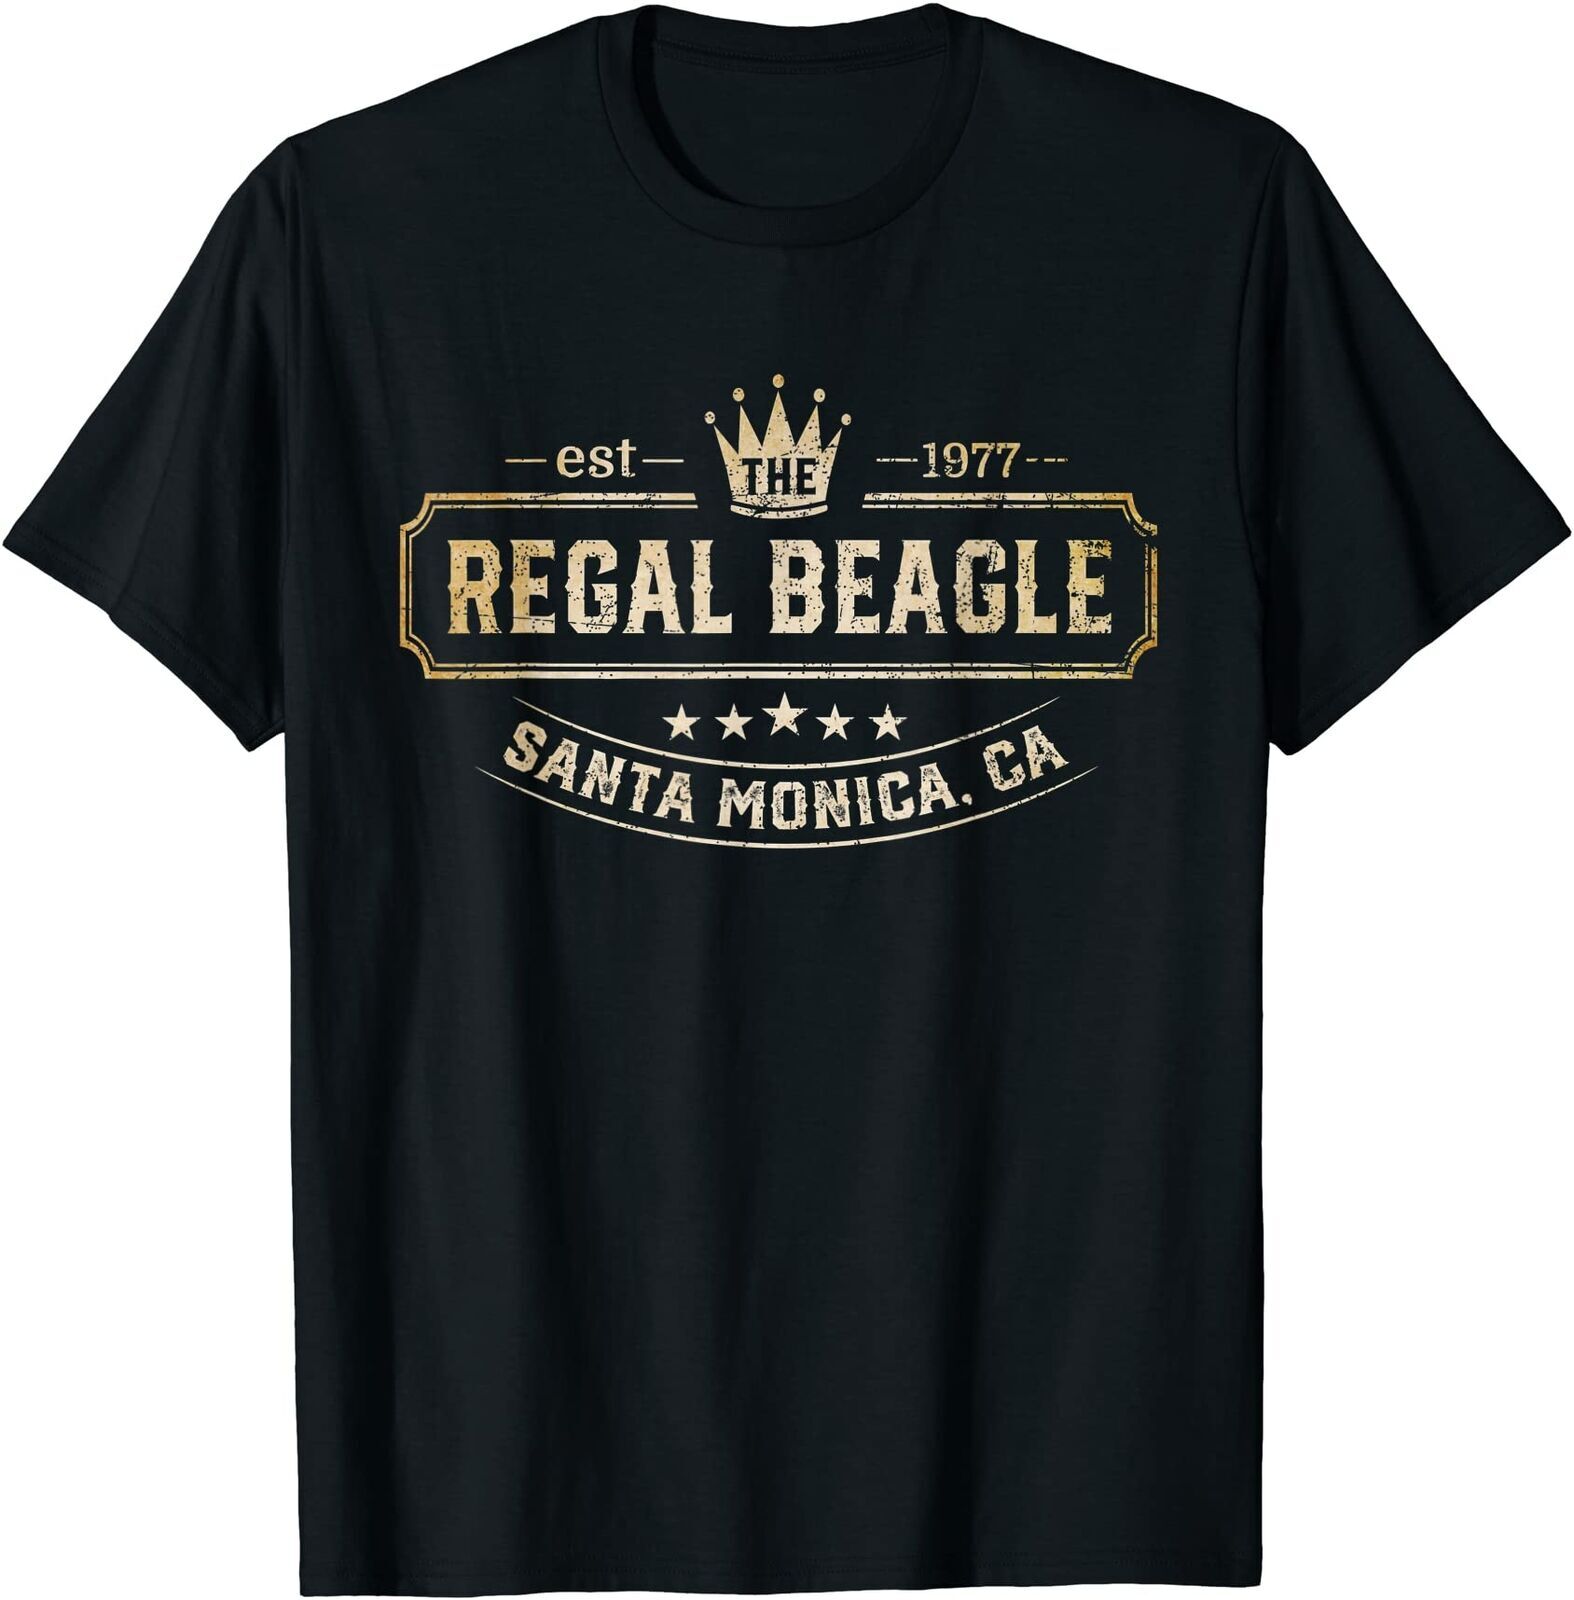 Did You Know About These 15 Regal Beagle T Shirt Facts